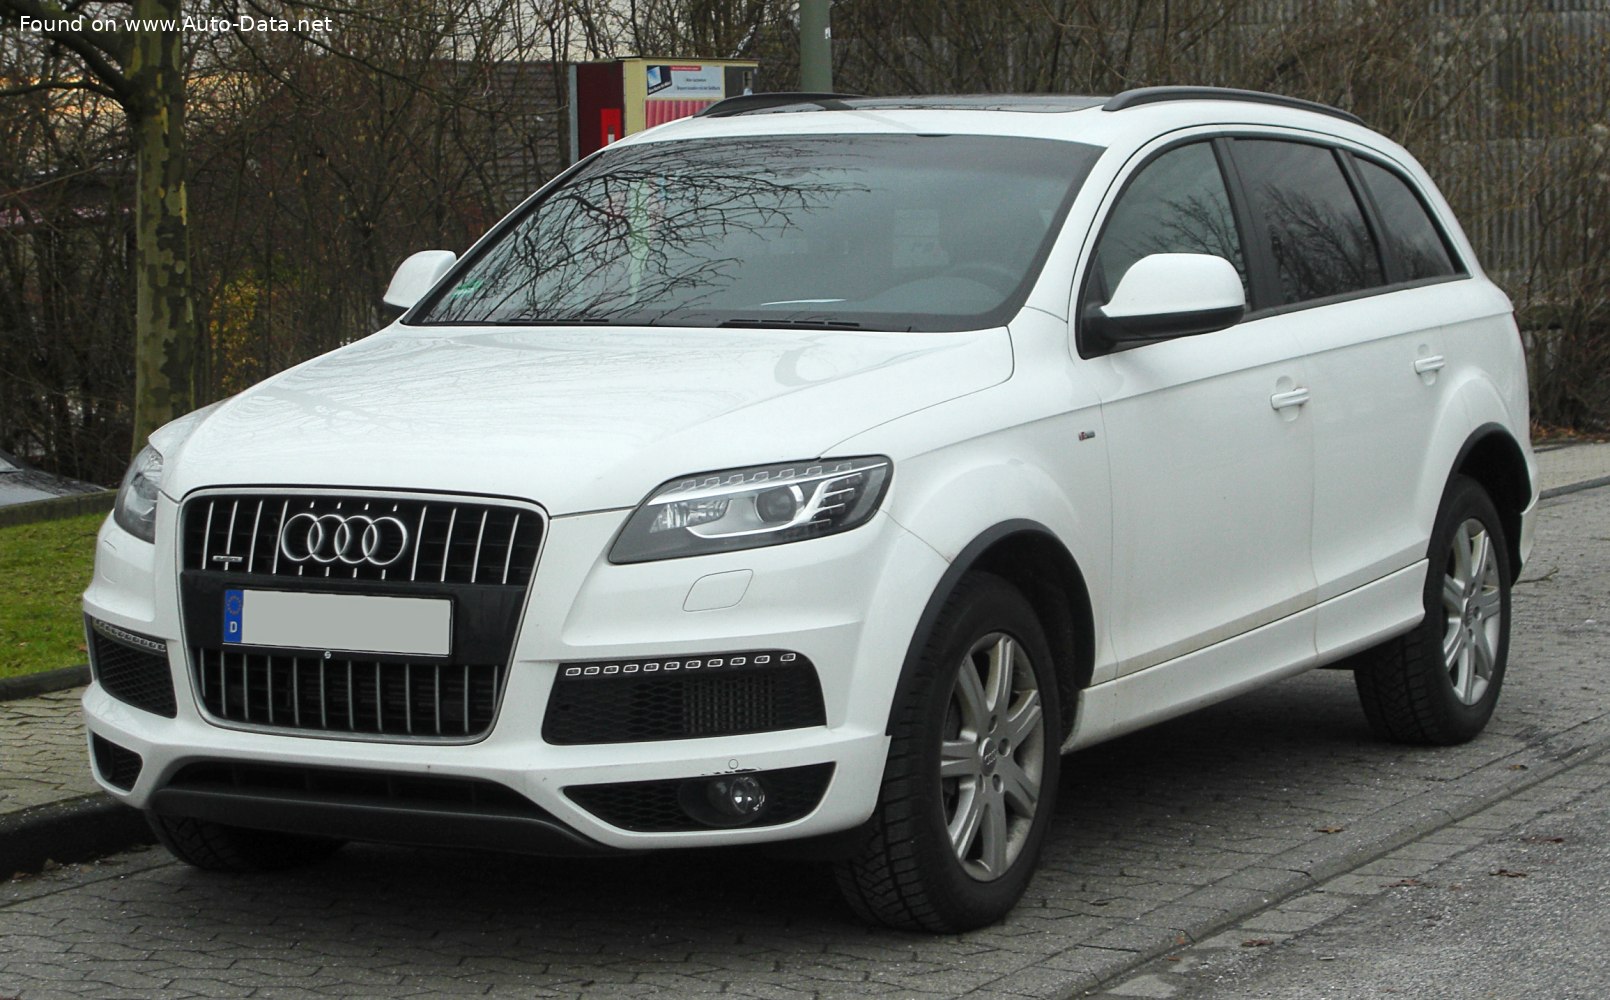 2011 Audi Q7 Research, Photos, Specs and Expertise